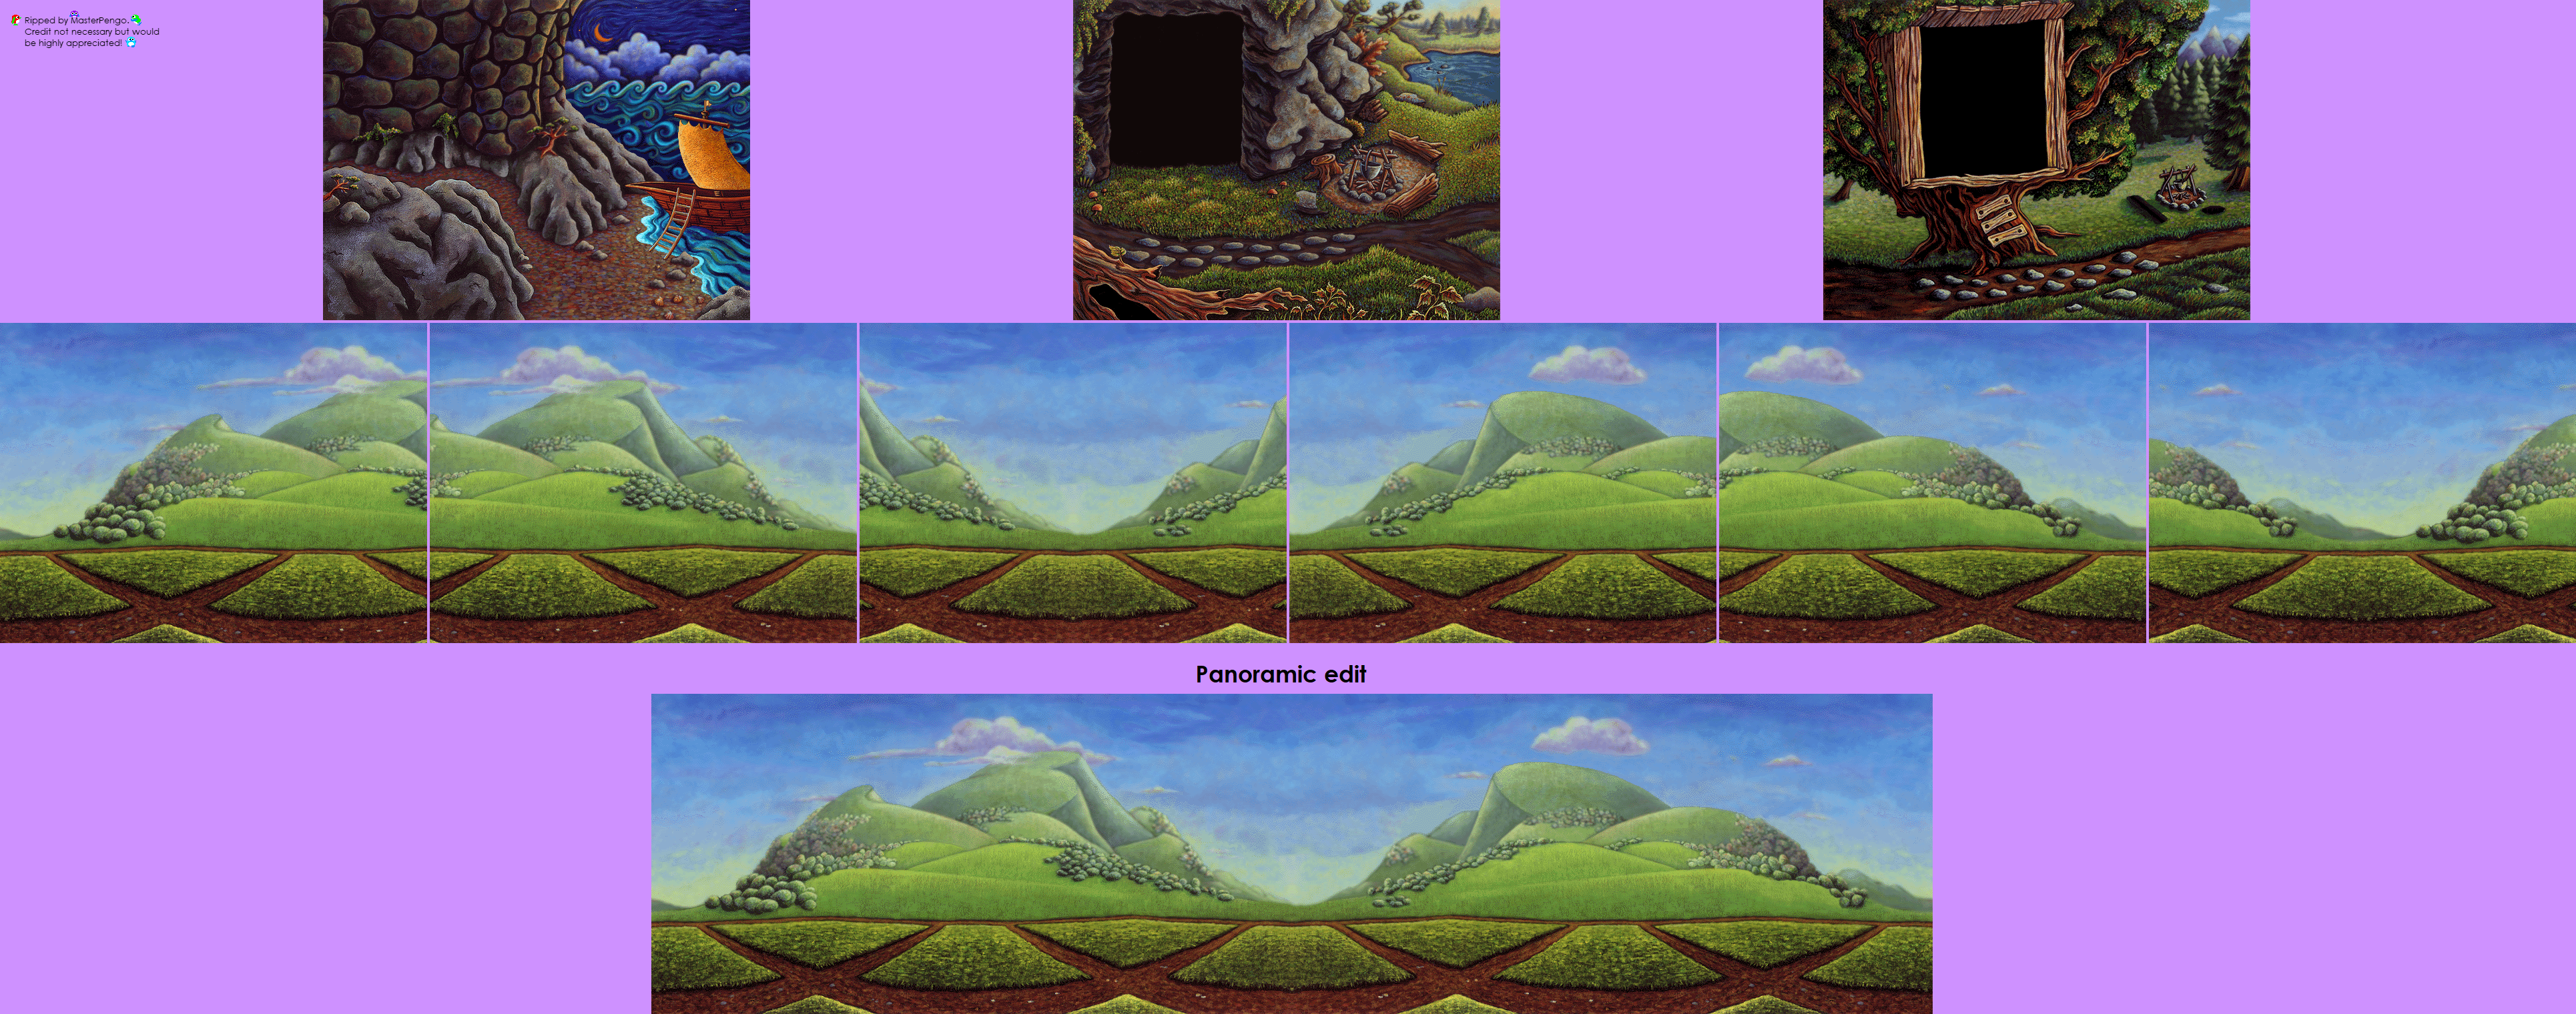 logical journey of the zoombinis.